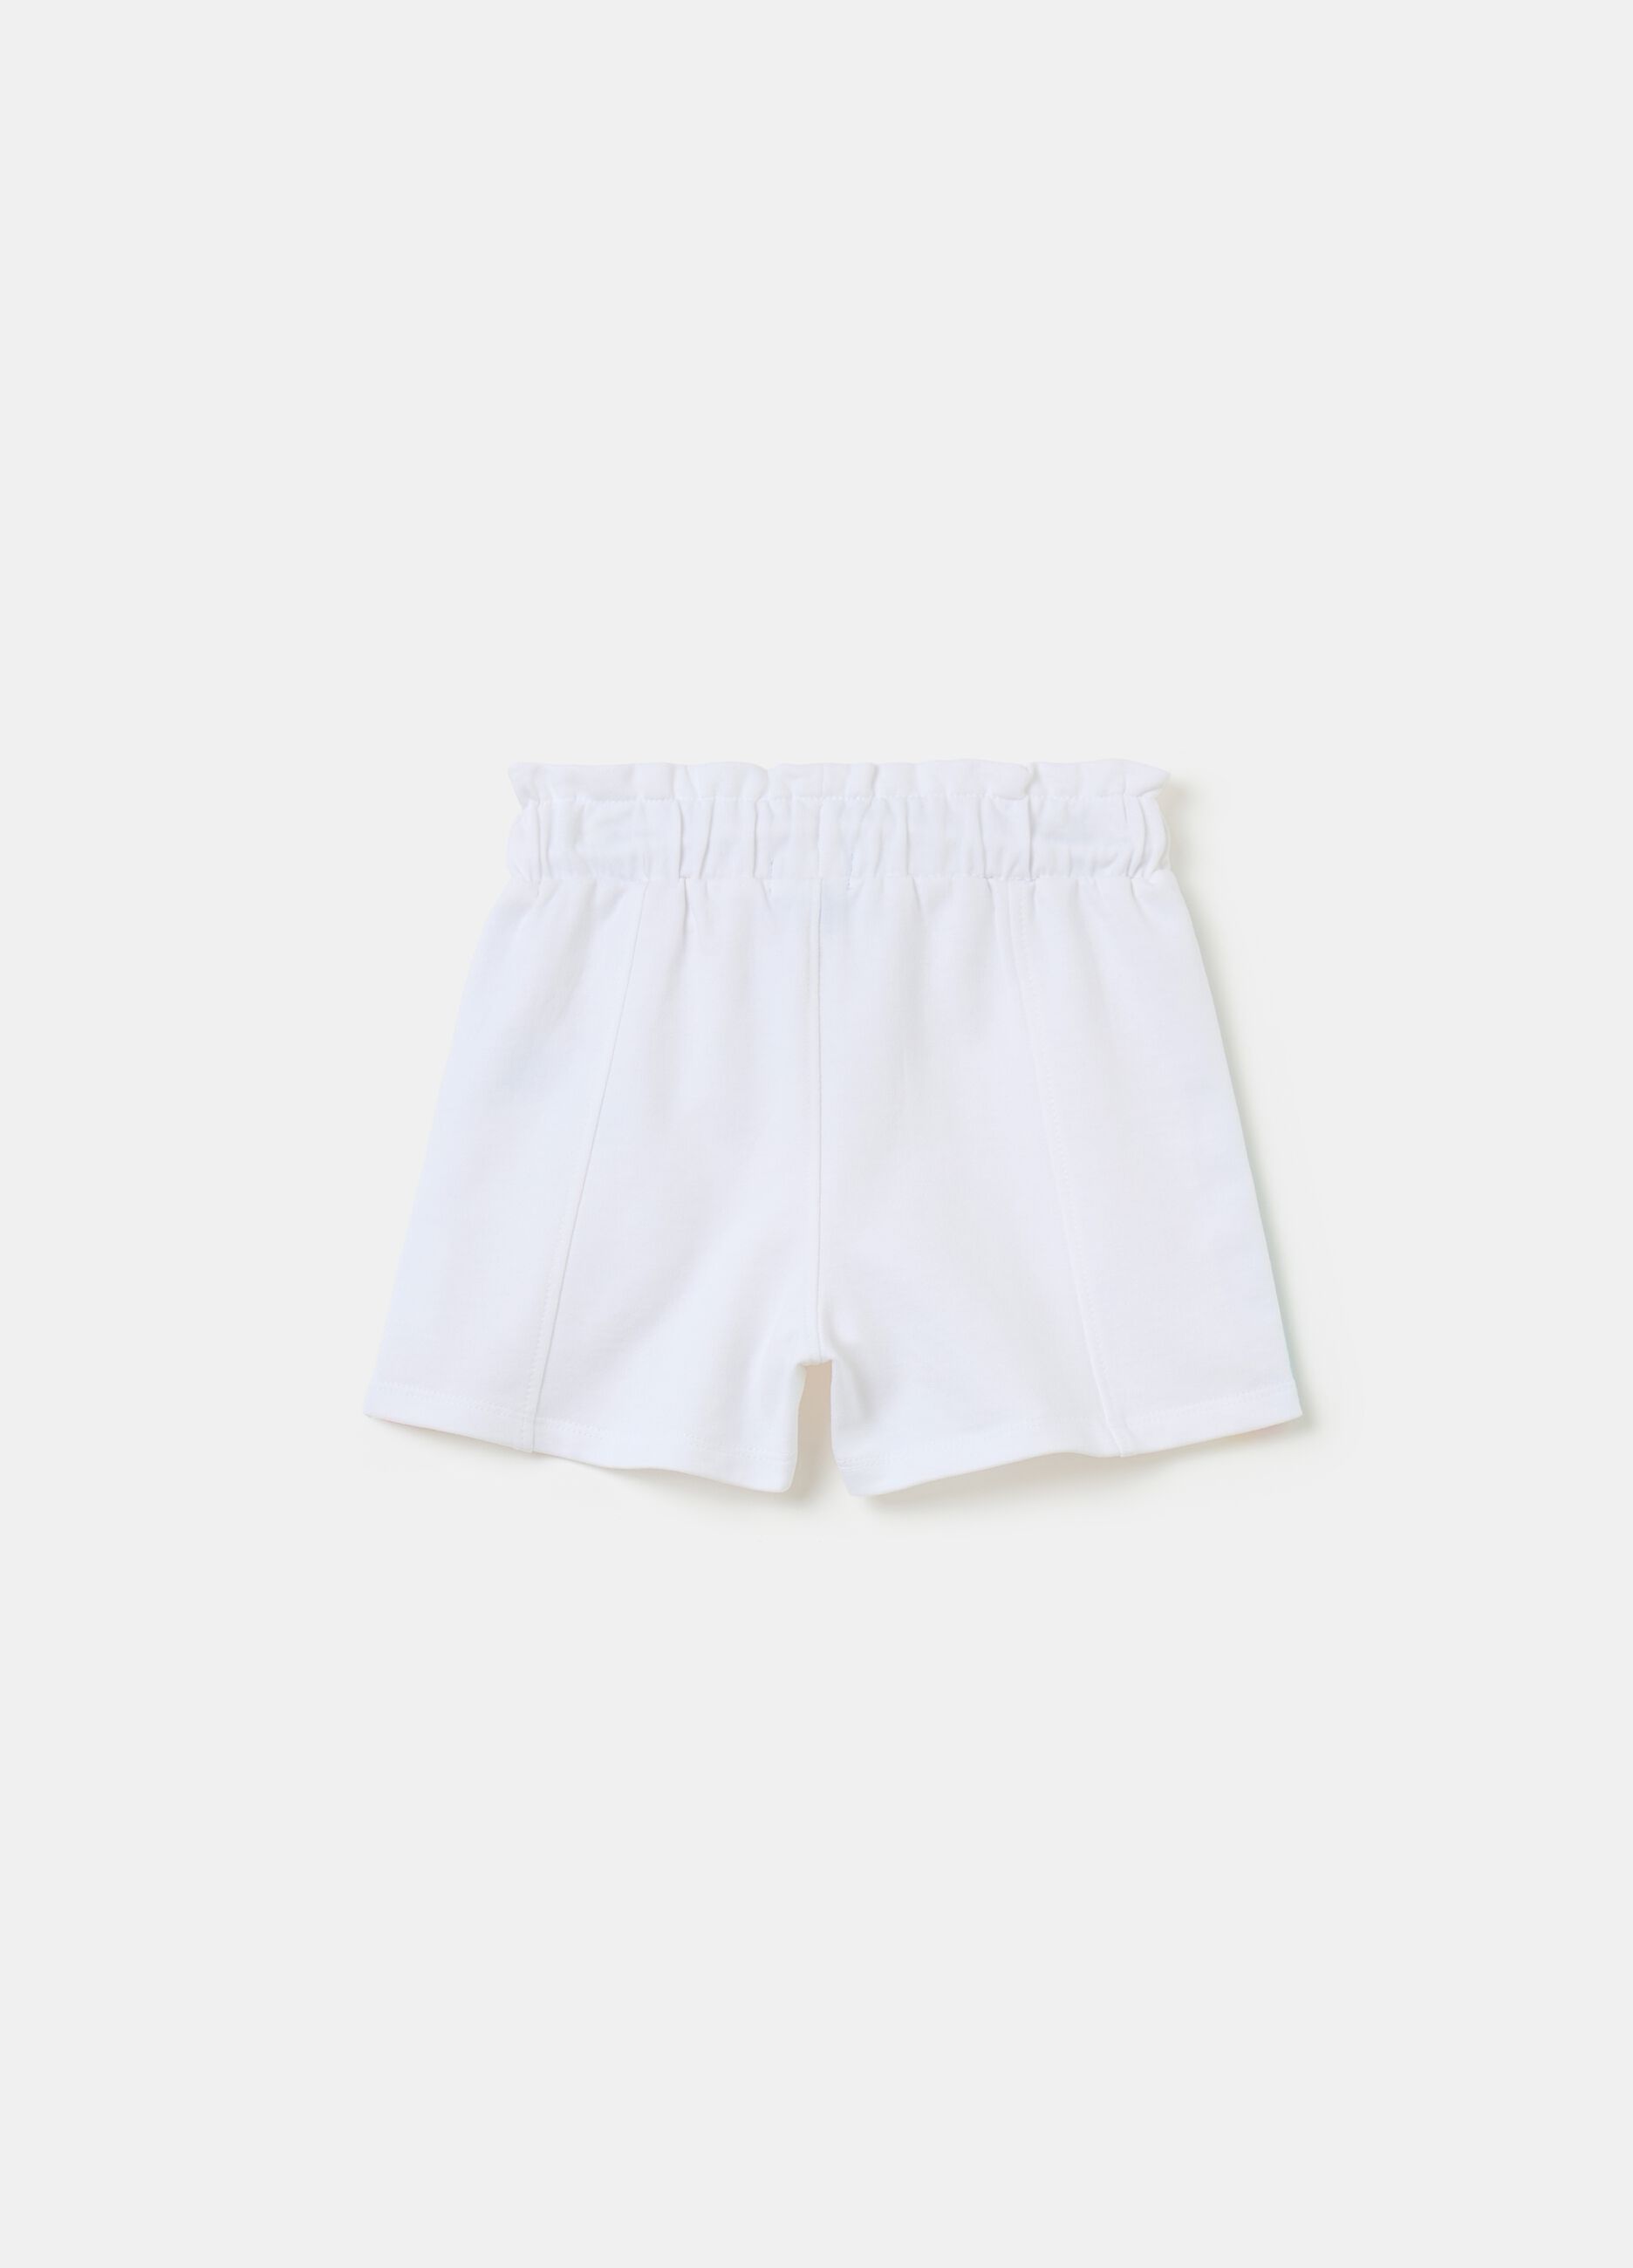 Shorts con bande a righe e coulisse